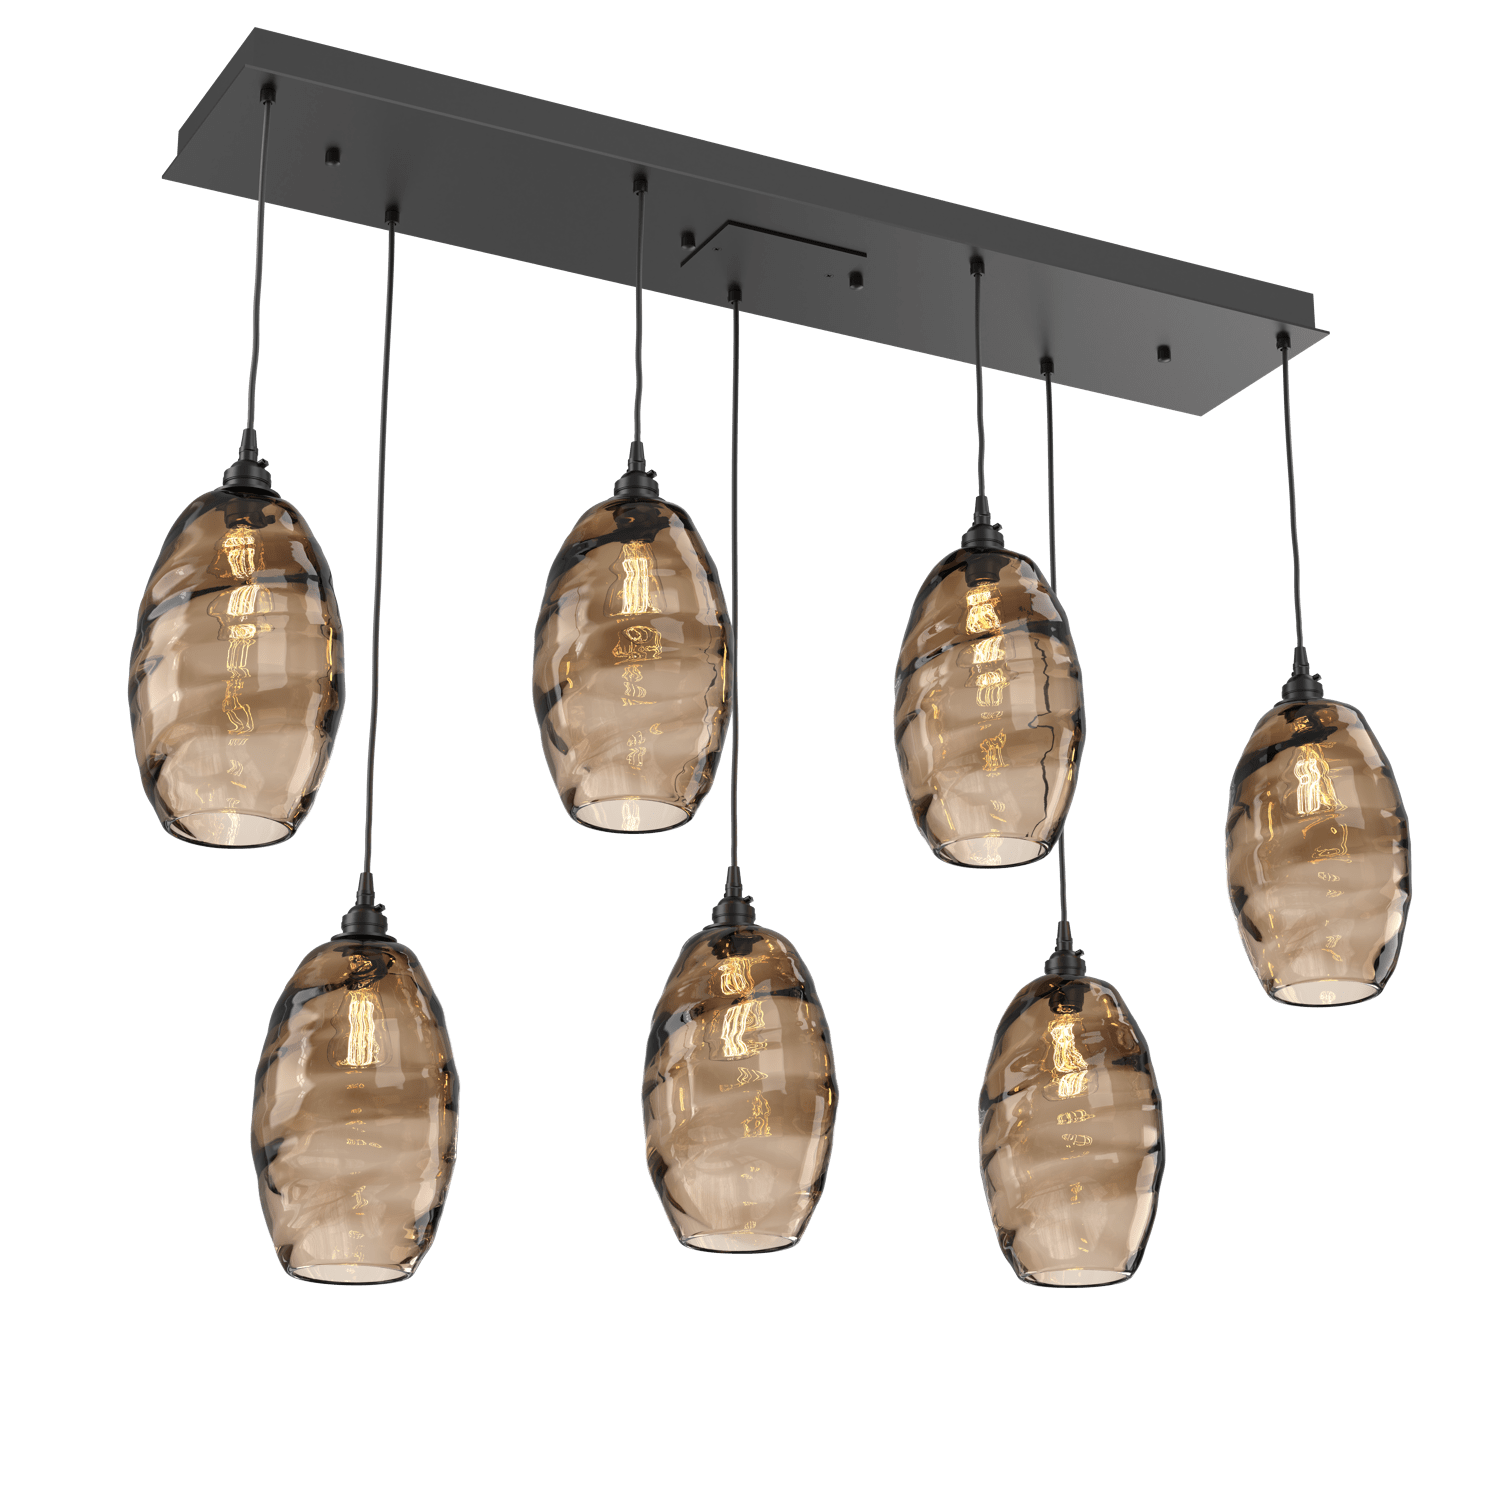 PLB0035-07-MB-OB-Hammerton-Studio-Optic-Blown-Glass-Elisse-7-light-linear-pendant-chandelier-with-matte-black-finish-and-optic-bronze-blown-glass-shades-and-incandescent-lamping